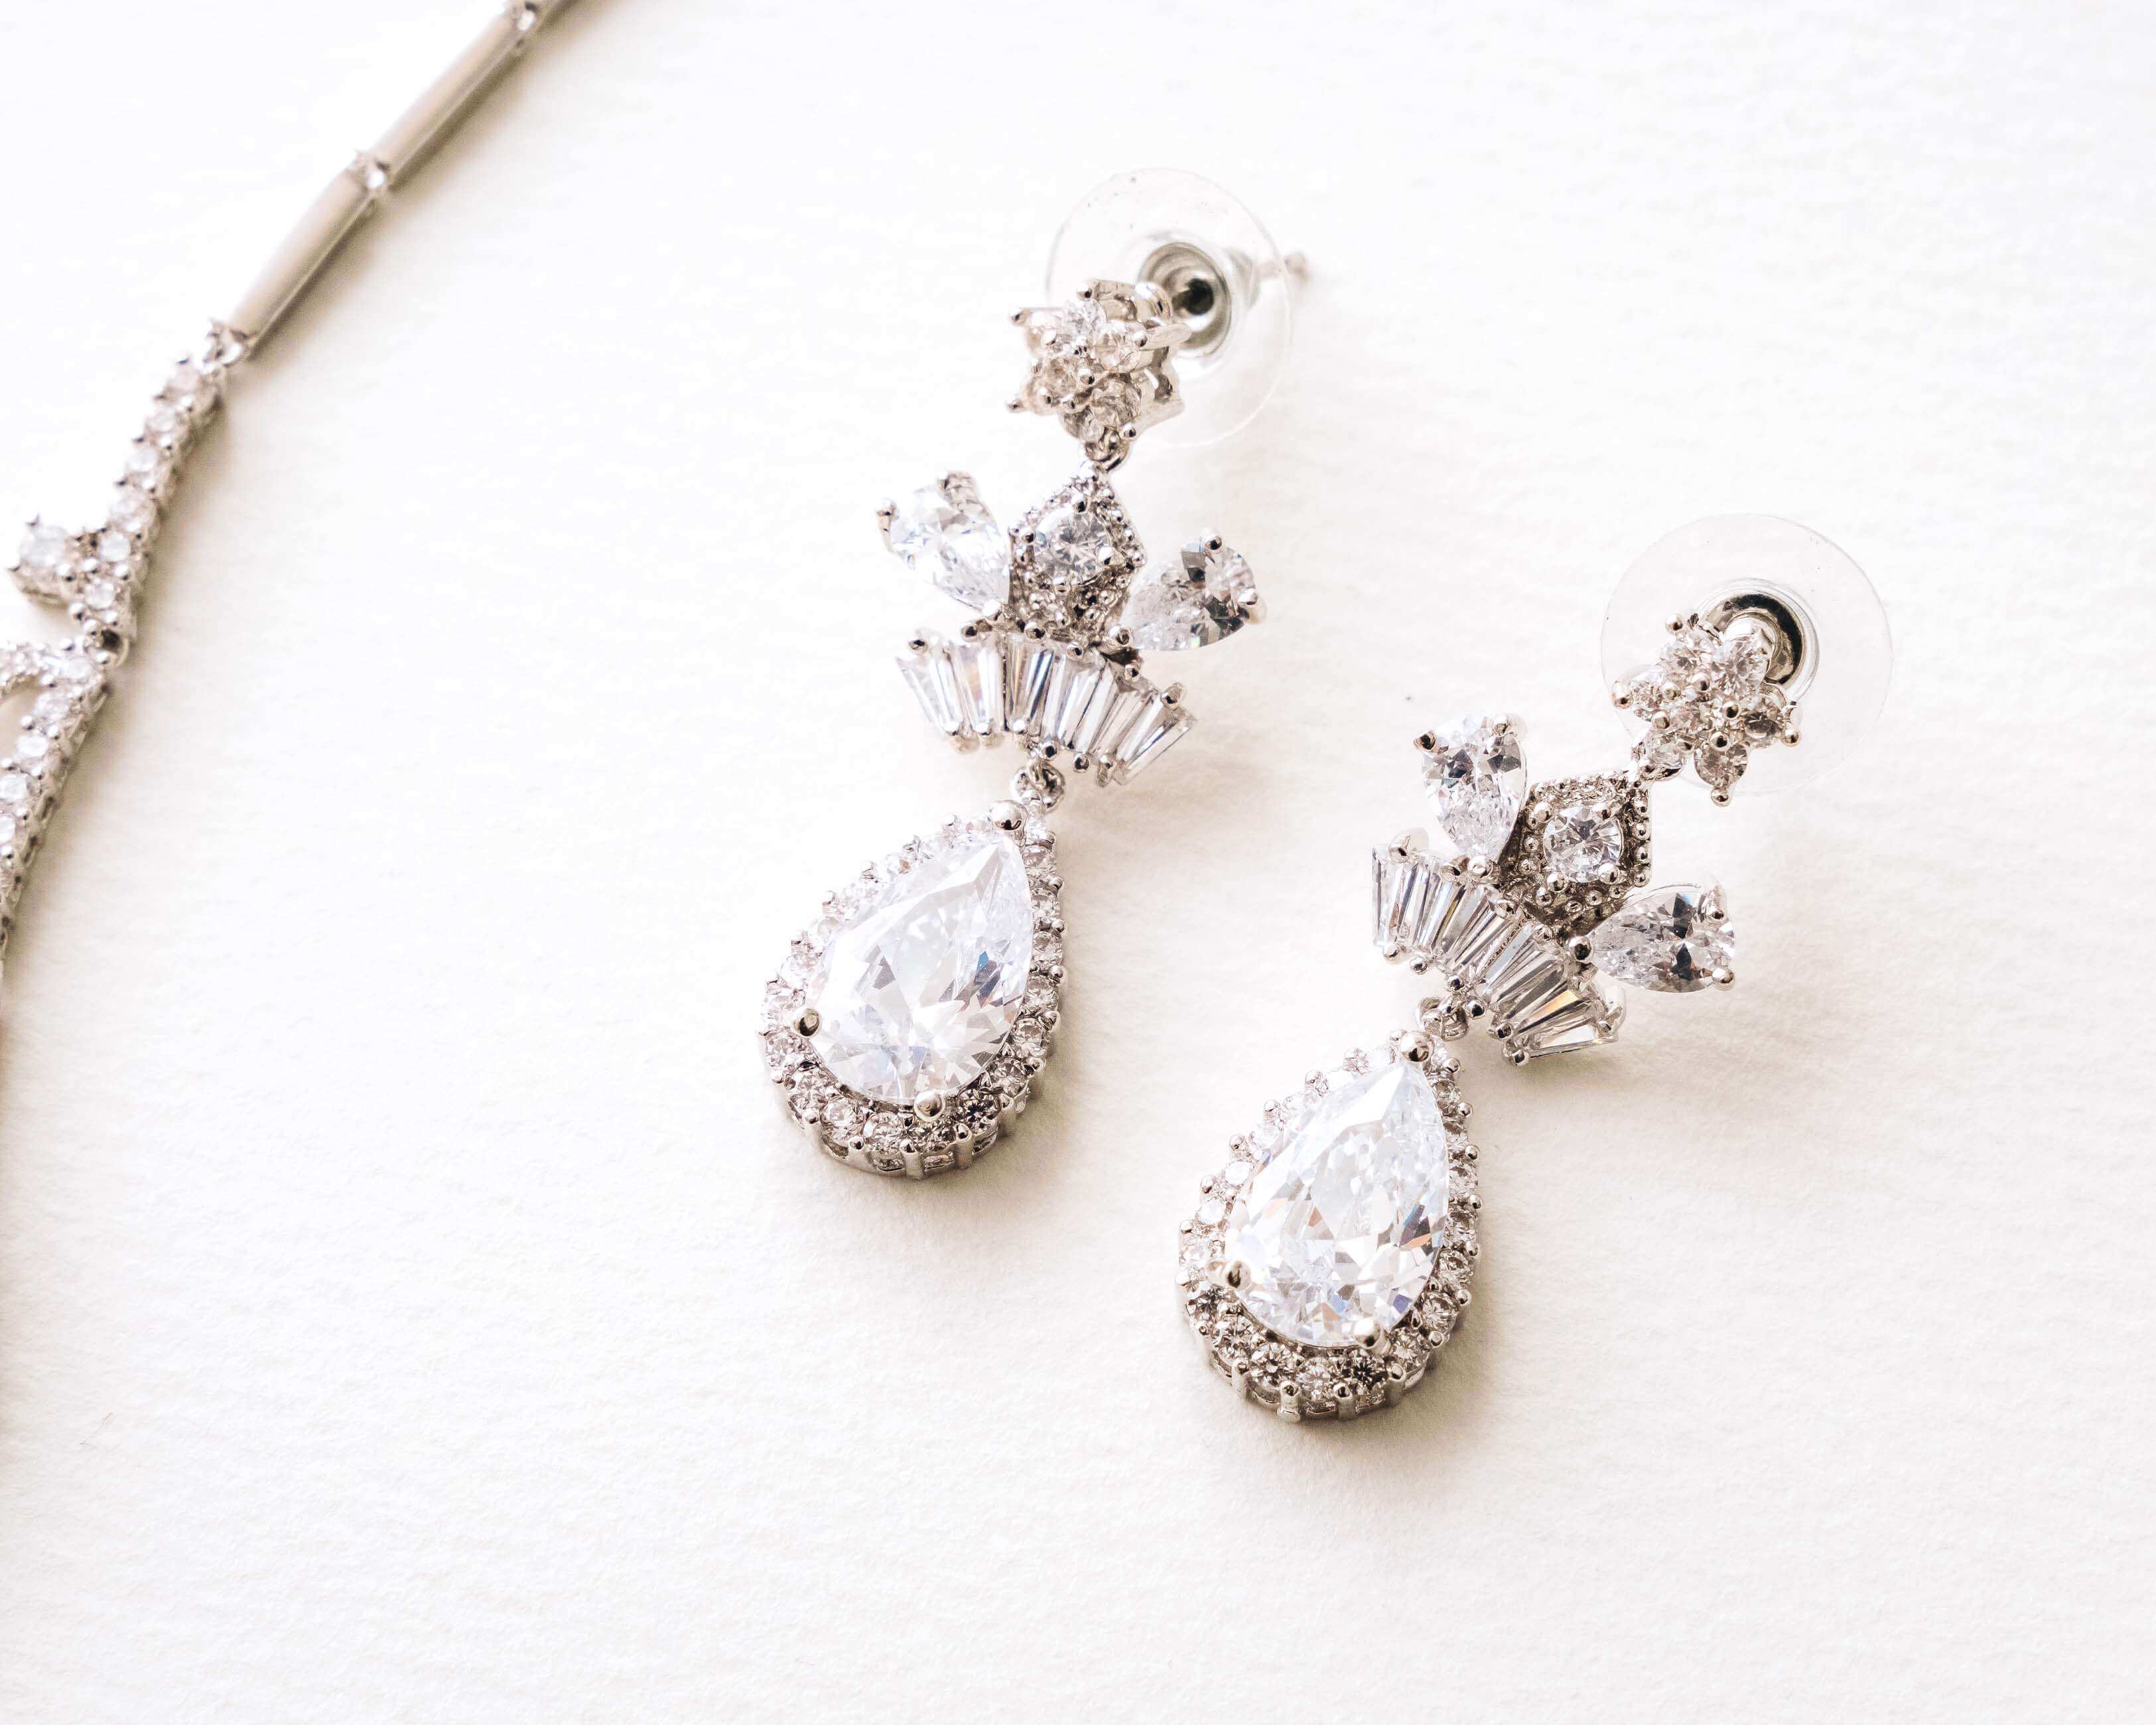 Silver Crystal Necklace Jewelry Set - The perfect wedding jewelry.